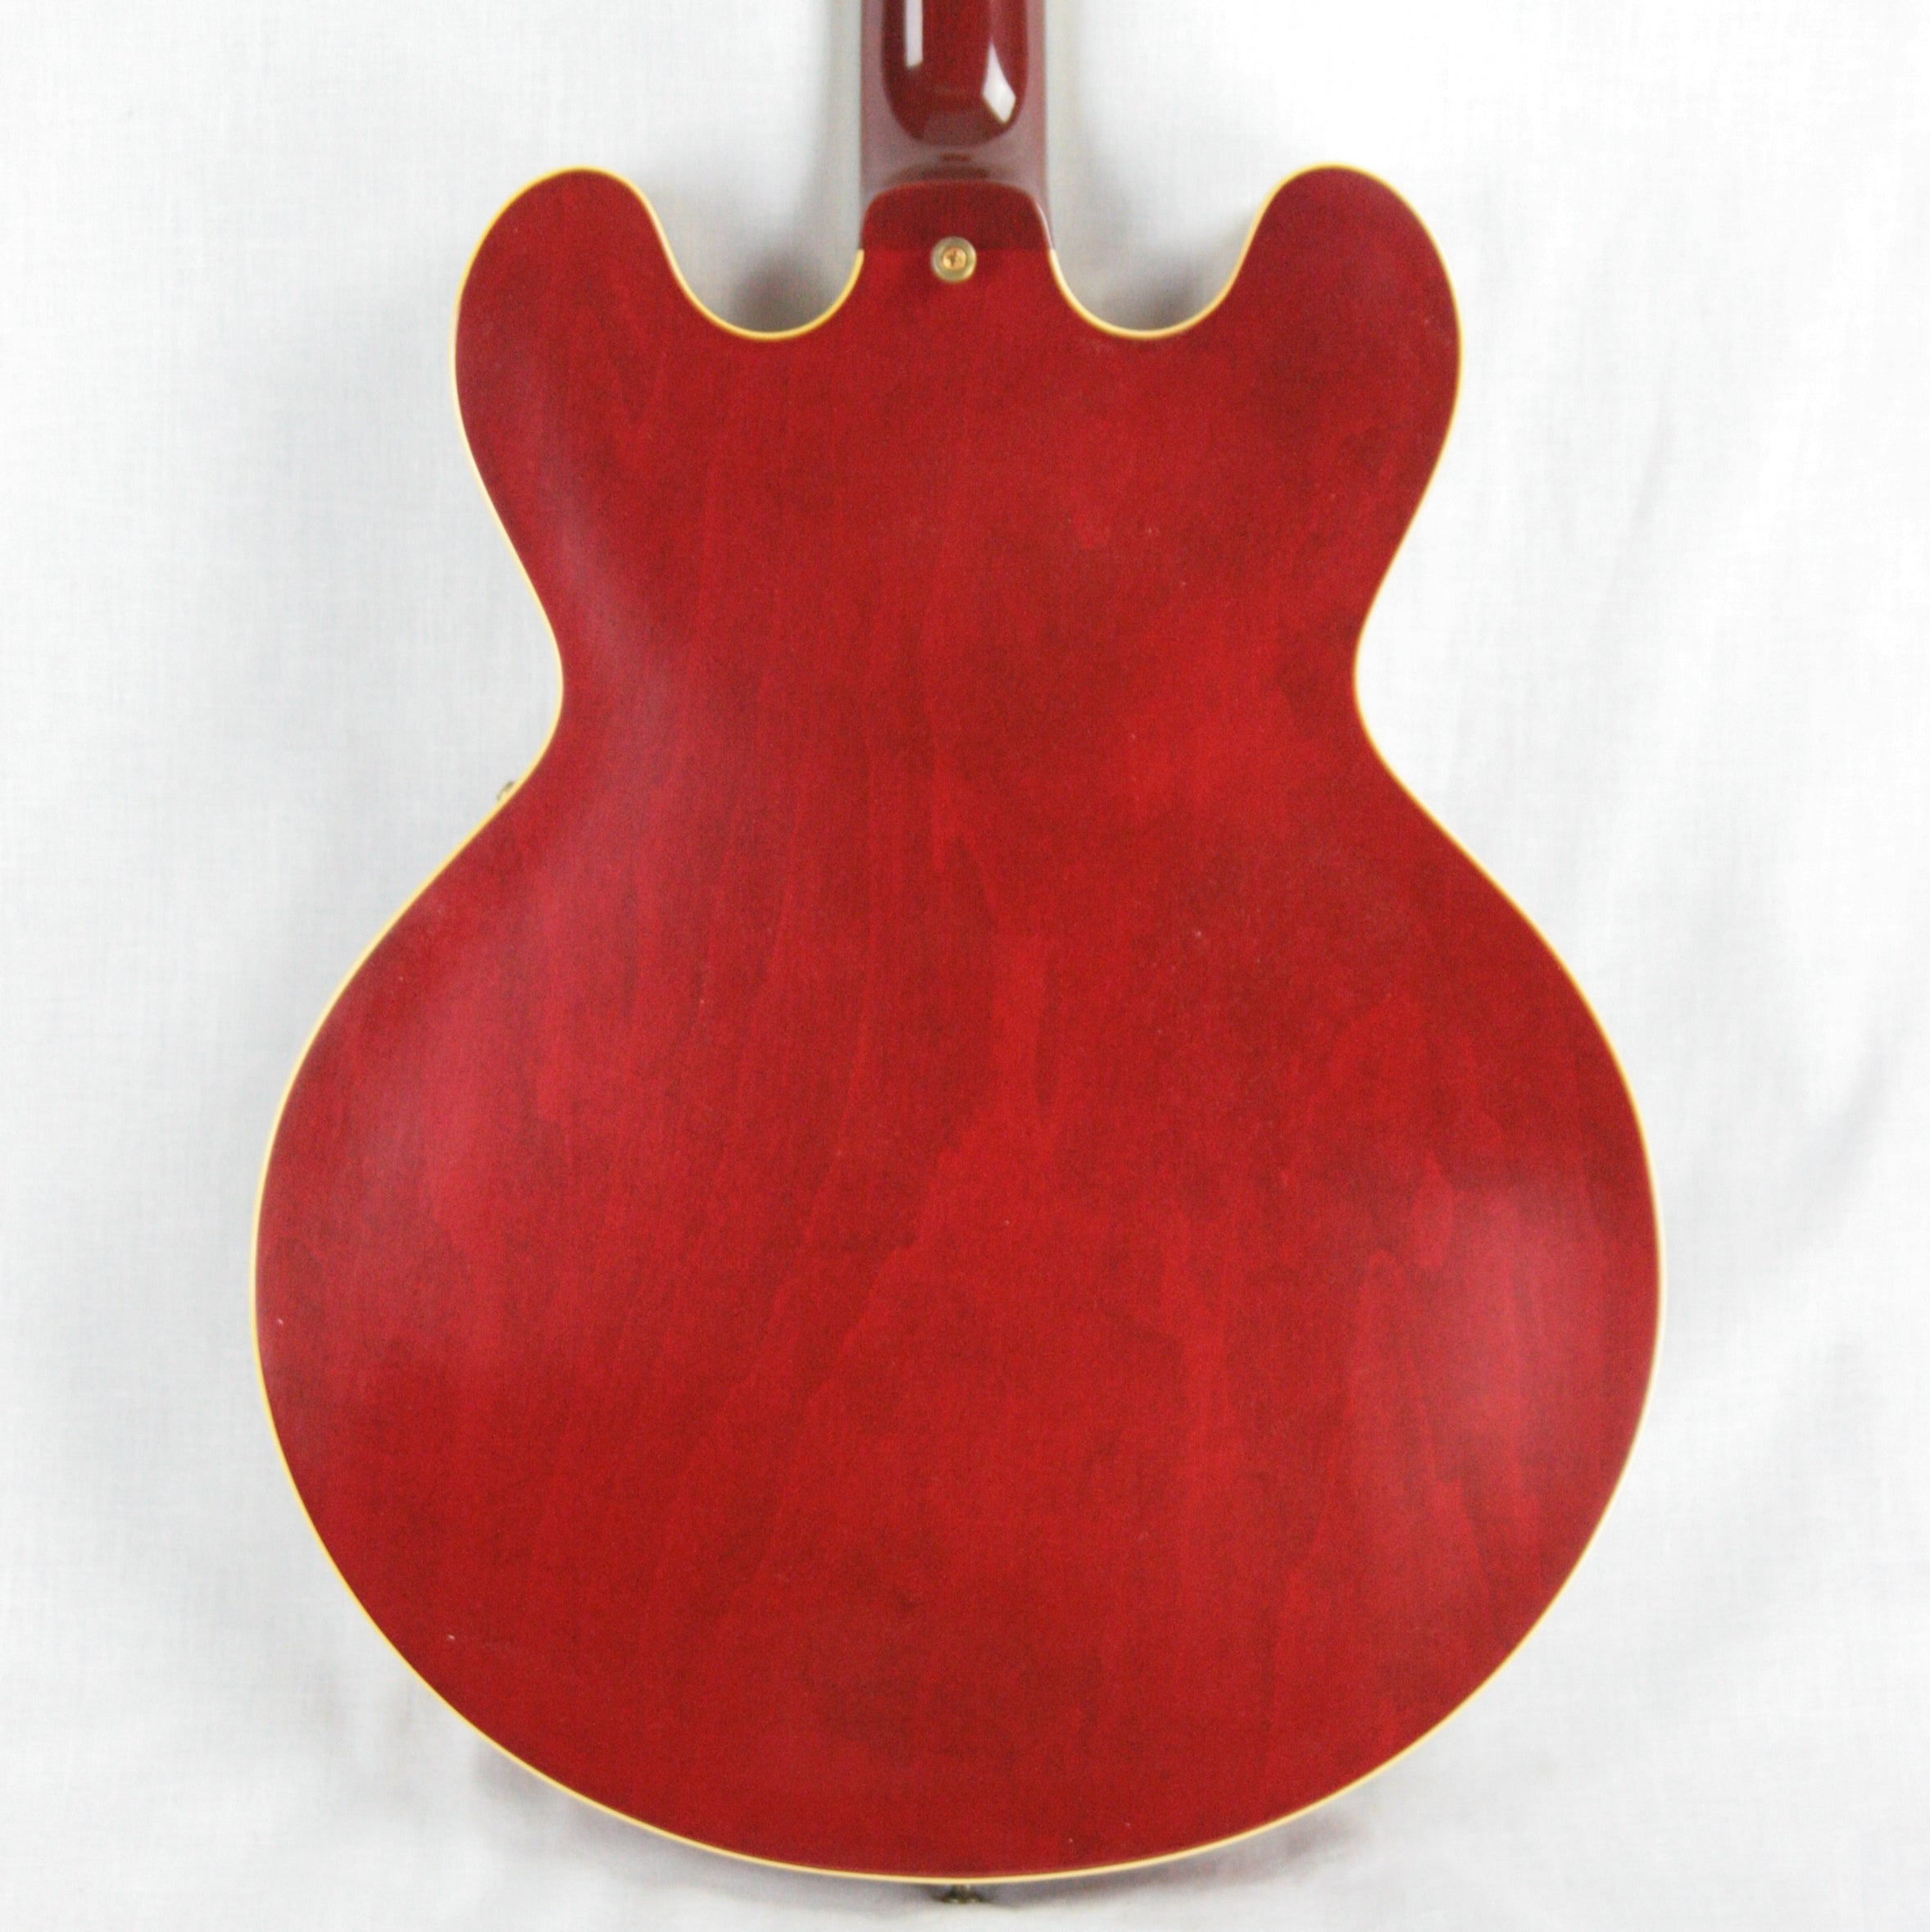 *SOLD*  MINT Gibson Memphis Freddie King 1960 ES-345 TDC Cherry Red 1950's Neck! 335 355